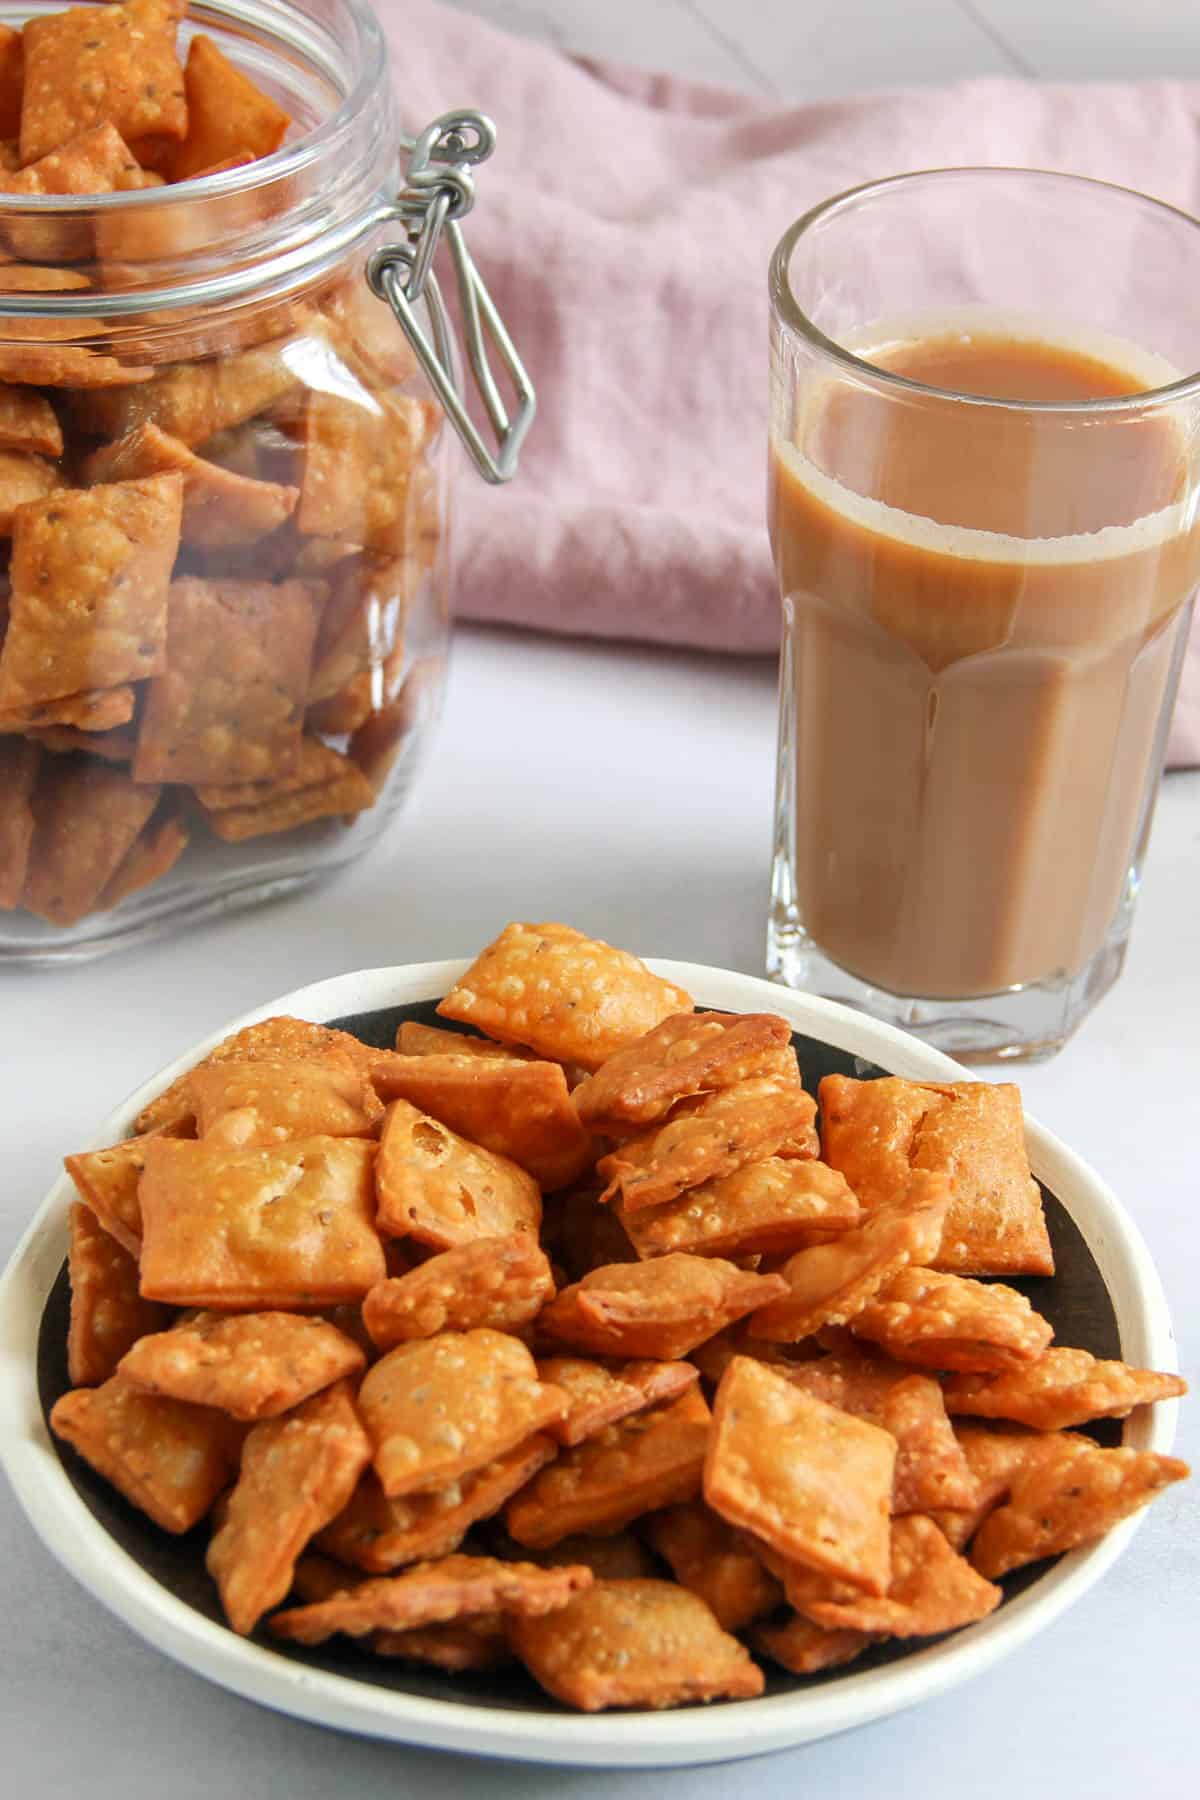 namakpare in a bowl served with chai 